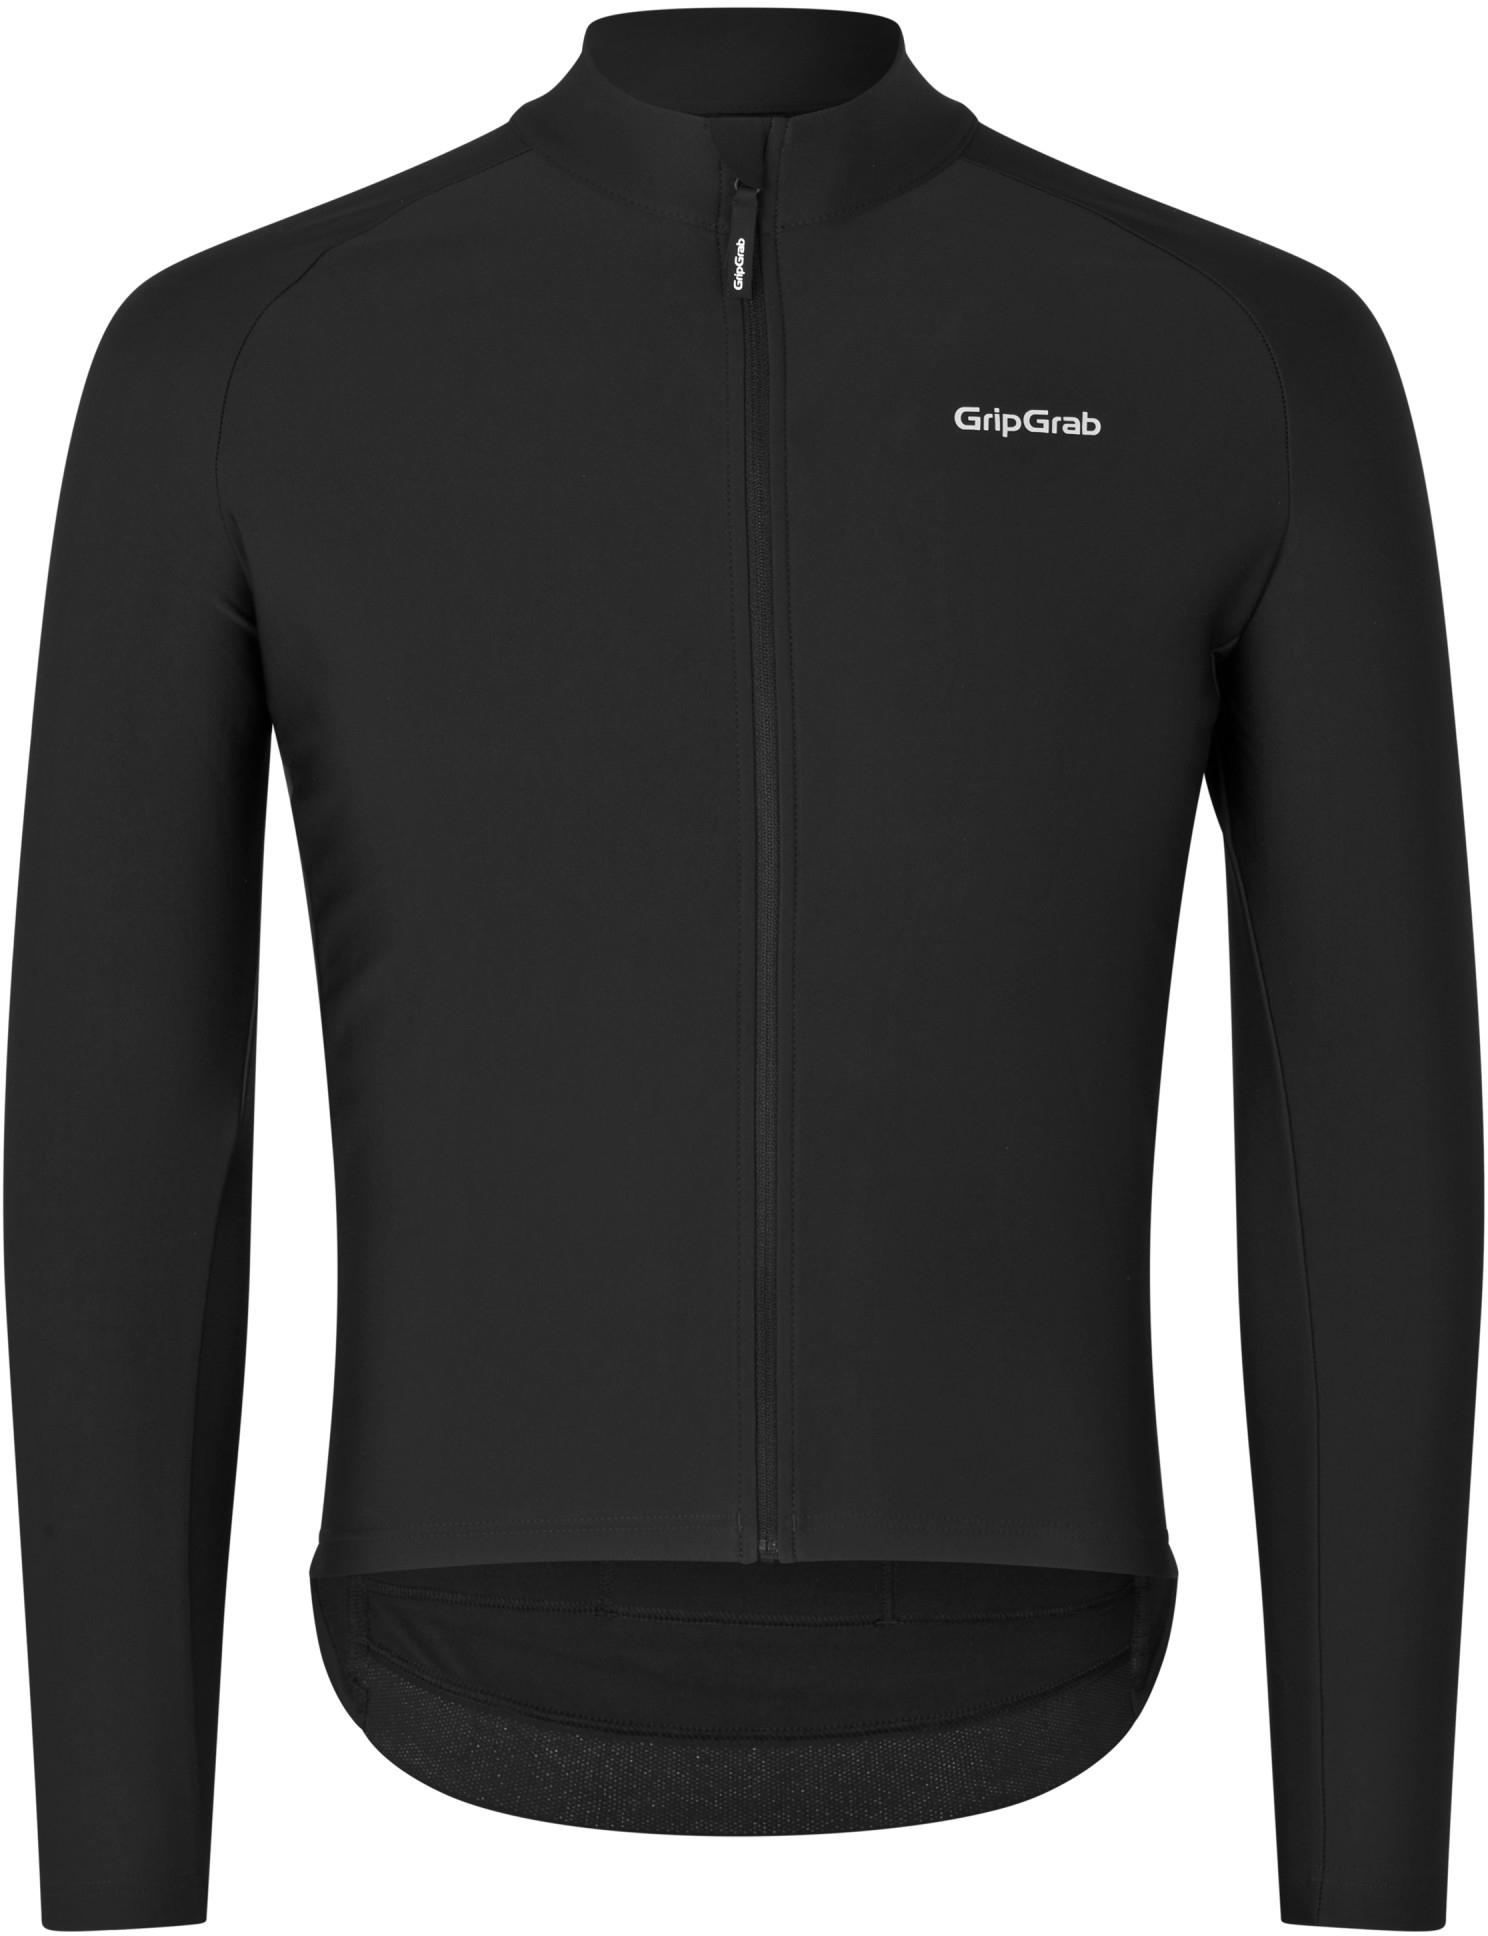 Gripgrab Thermapace Thermal Long Sleeve Jersey - Black